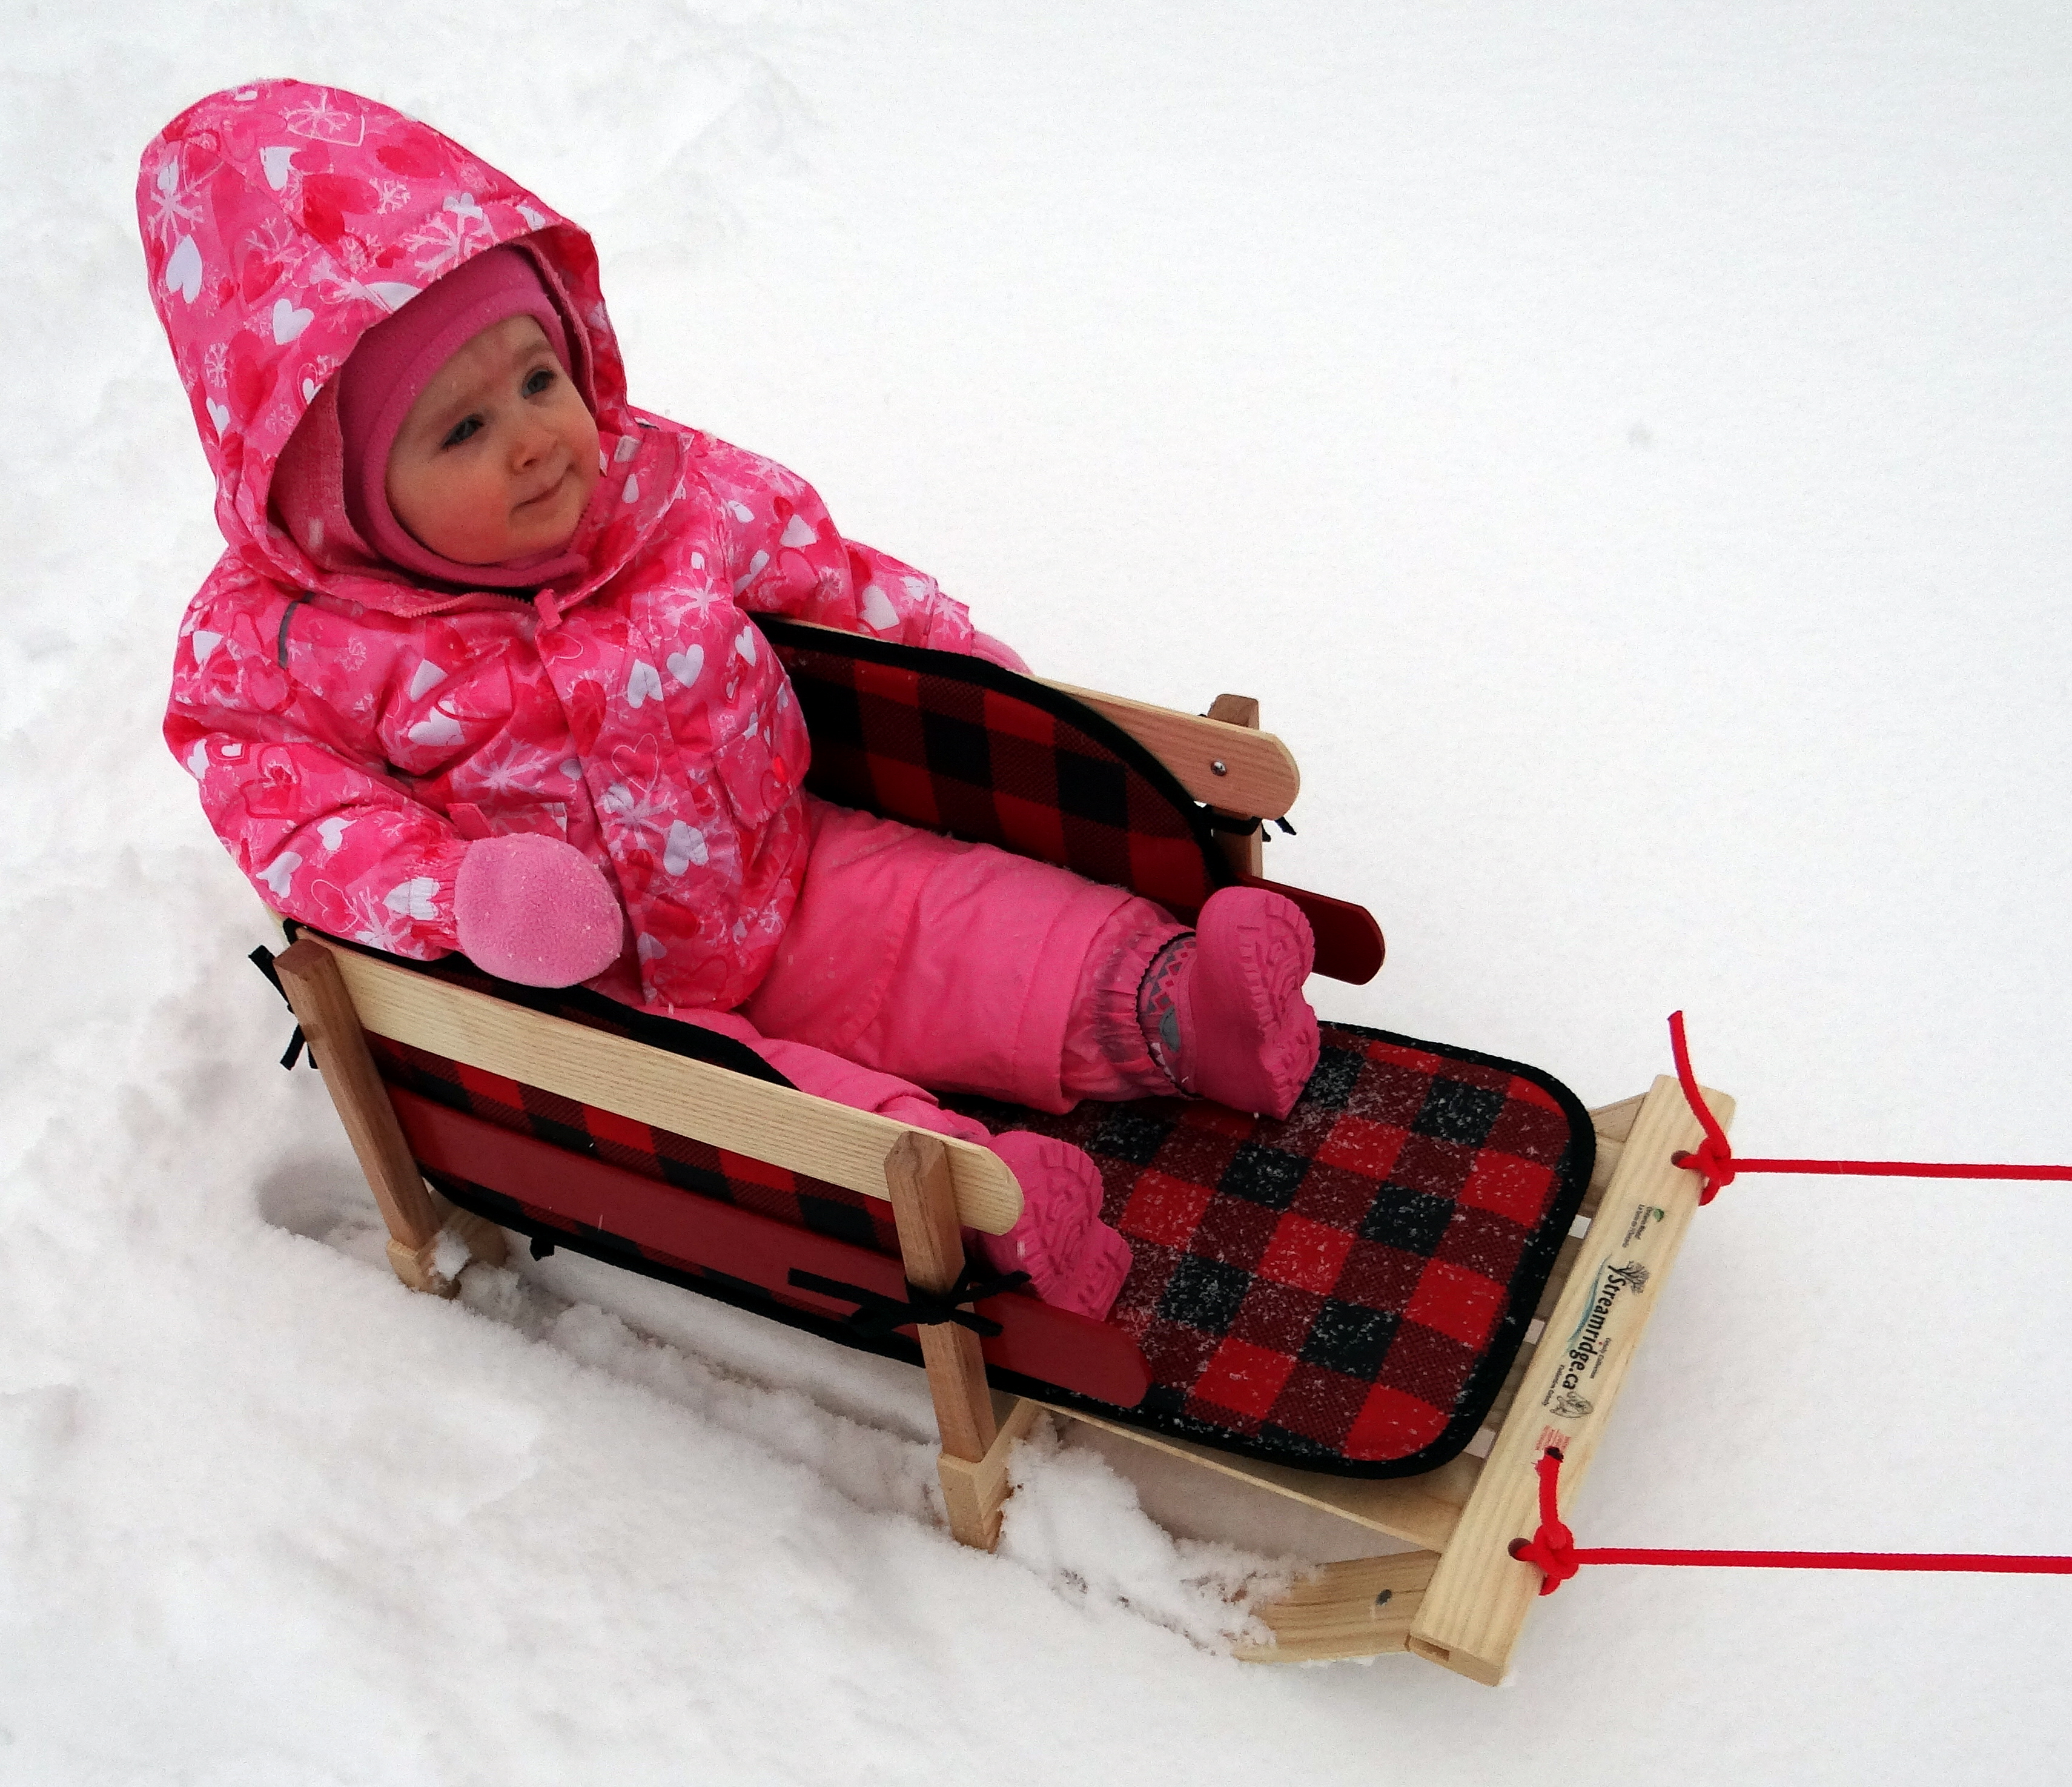 Baby in a sled